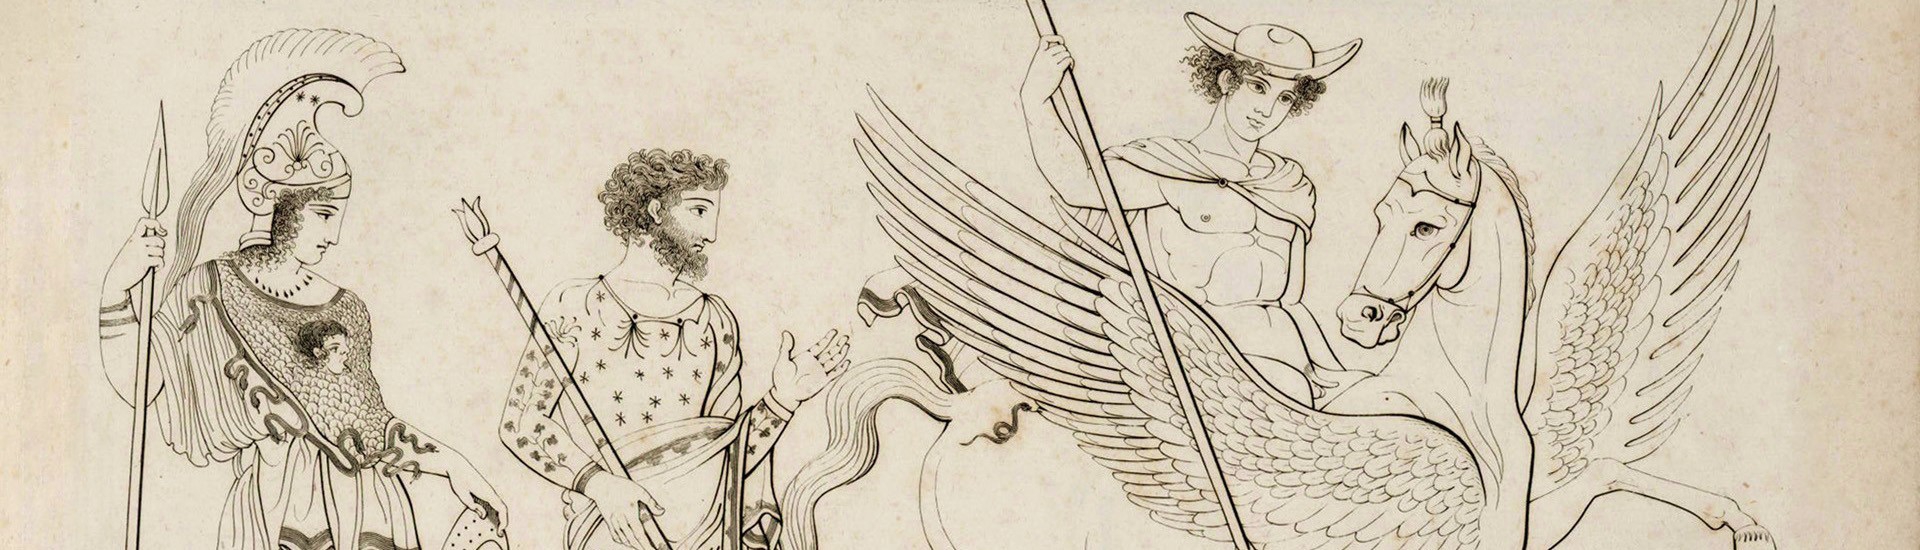 Bellerophon on Pegasus. W. Hamilton &amp; J. Tischbein, <i>Collection of Engravings from Ancient Vases</i> I (1791), pl. I.